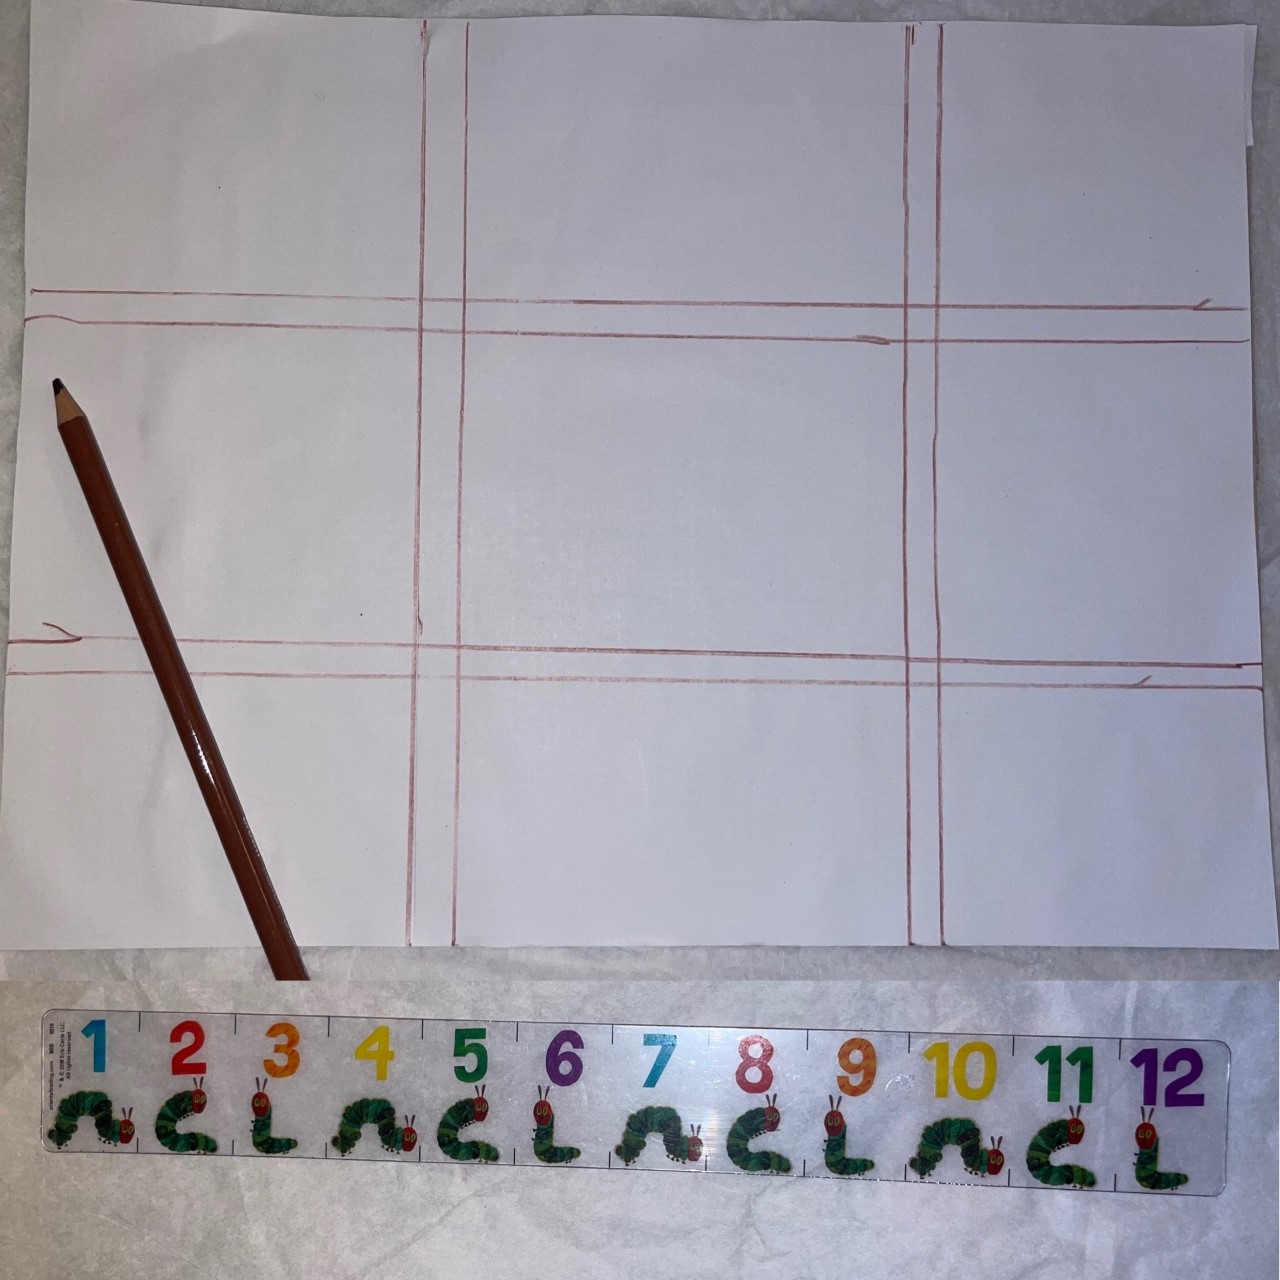 How to make Giant Tic Tac Toe Board Game from cardboard 